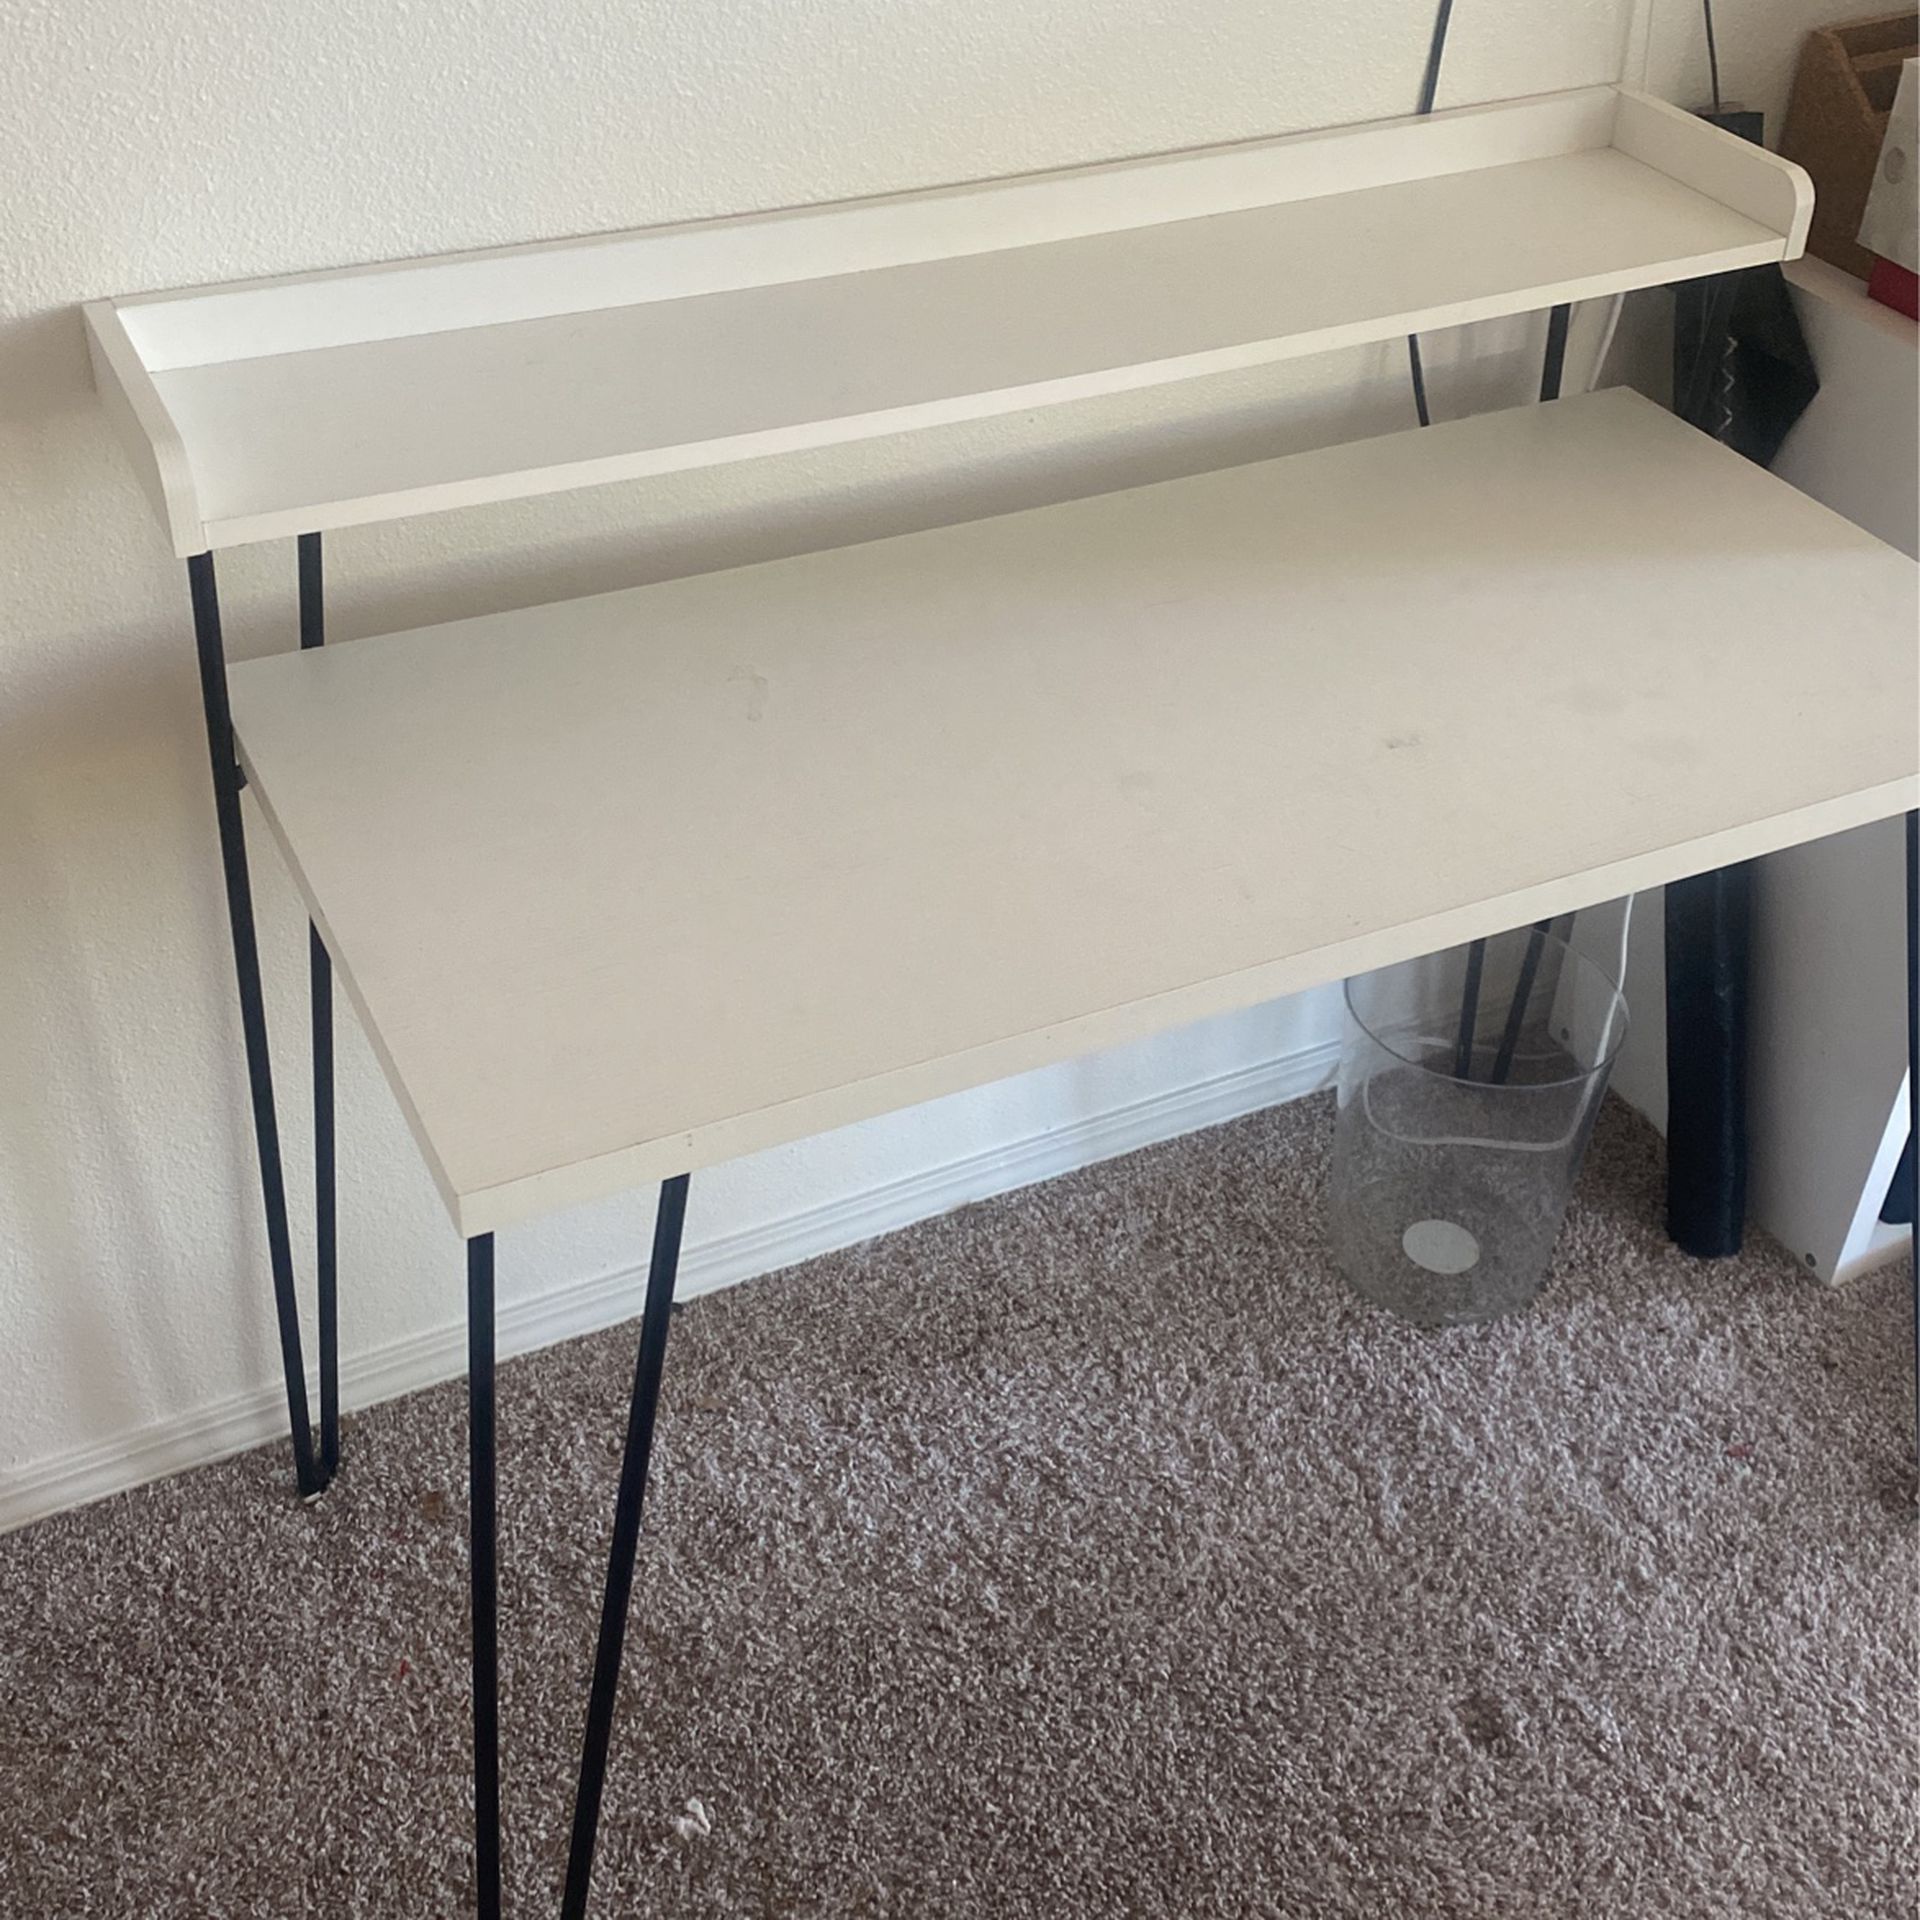 Desk with shelf and metal legs